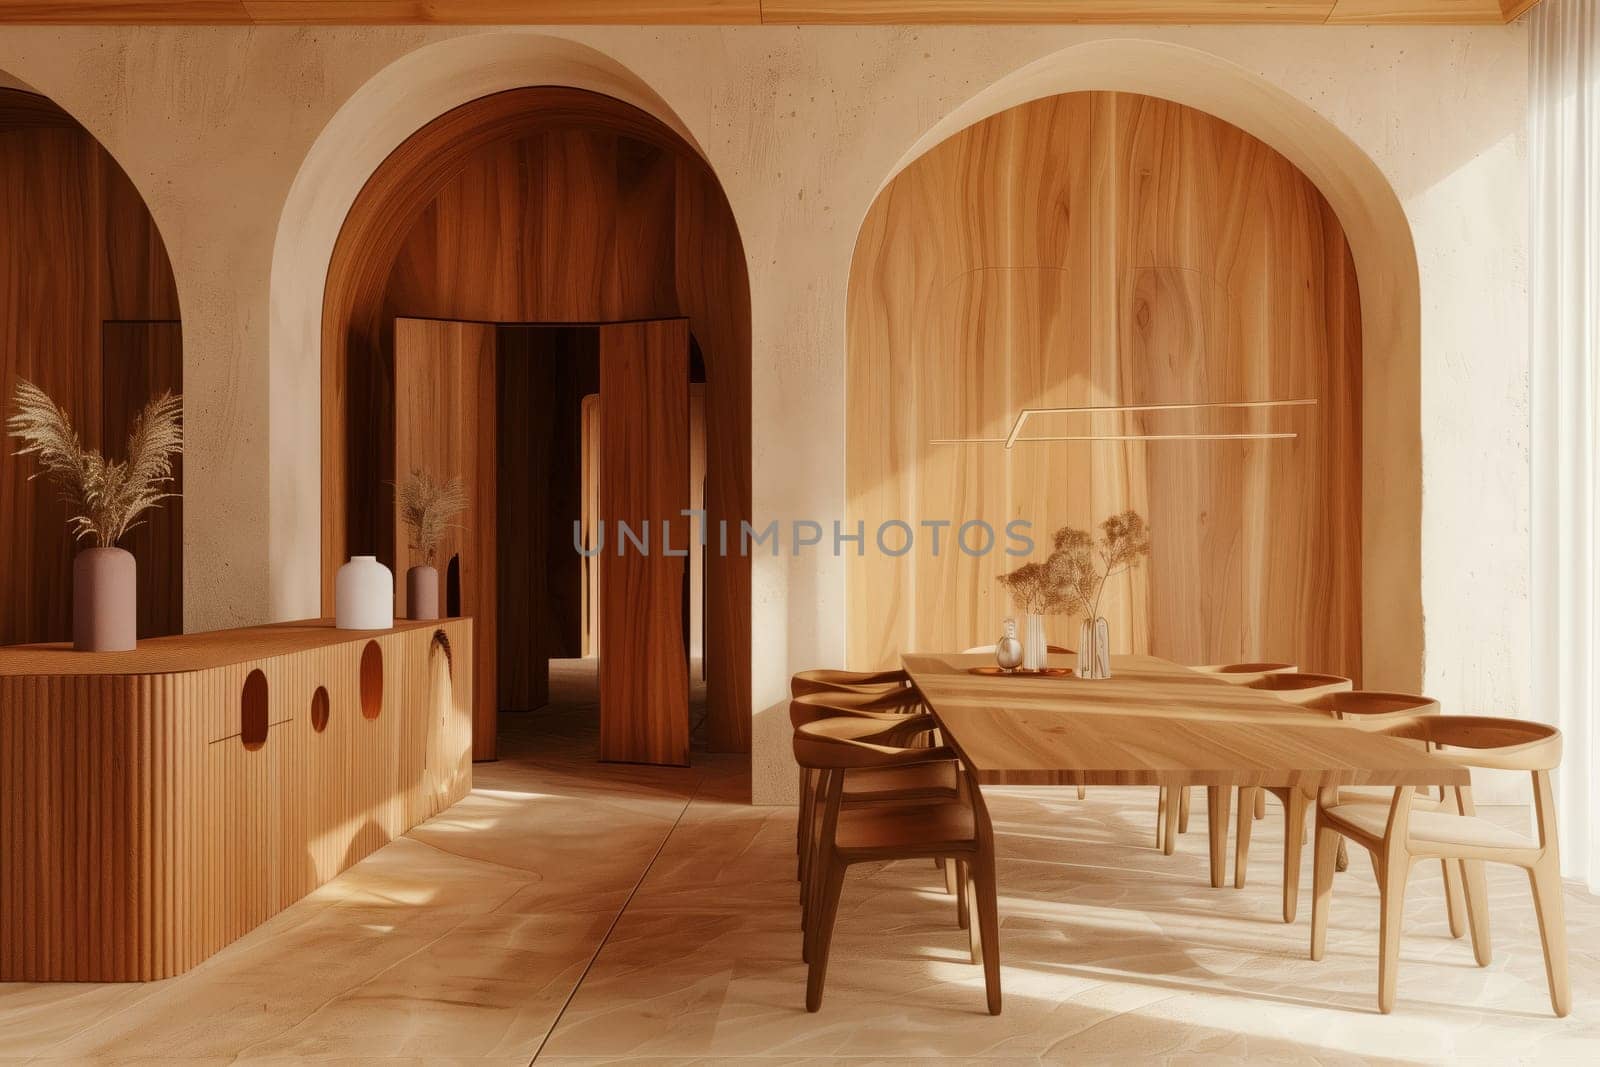 House with hardwood dining room furniture, table, chairs, and arches by richwolf